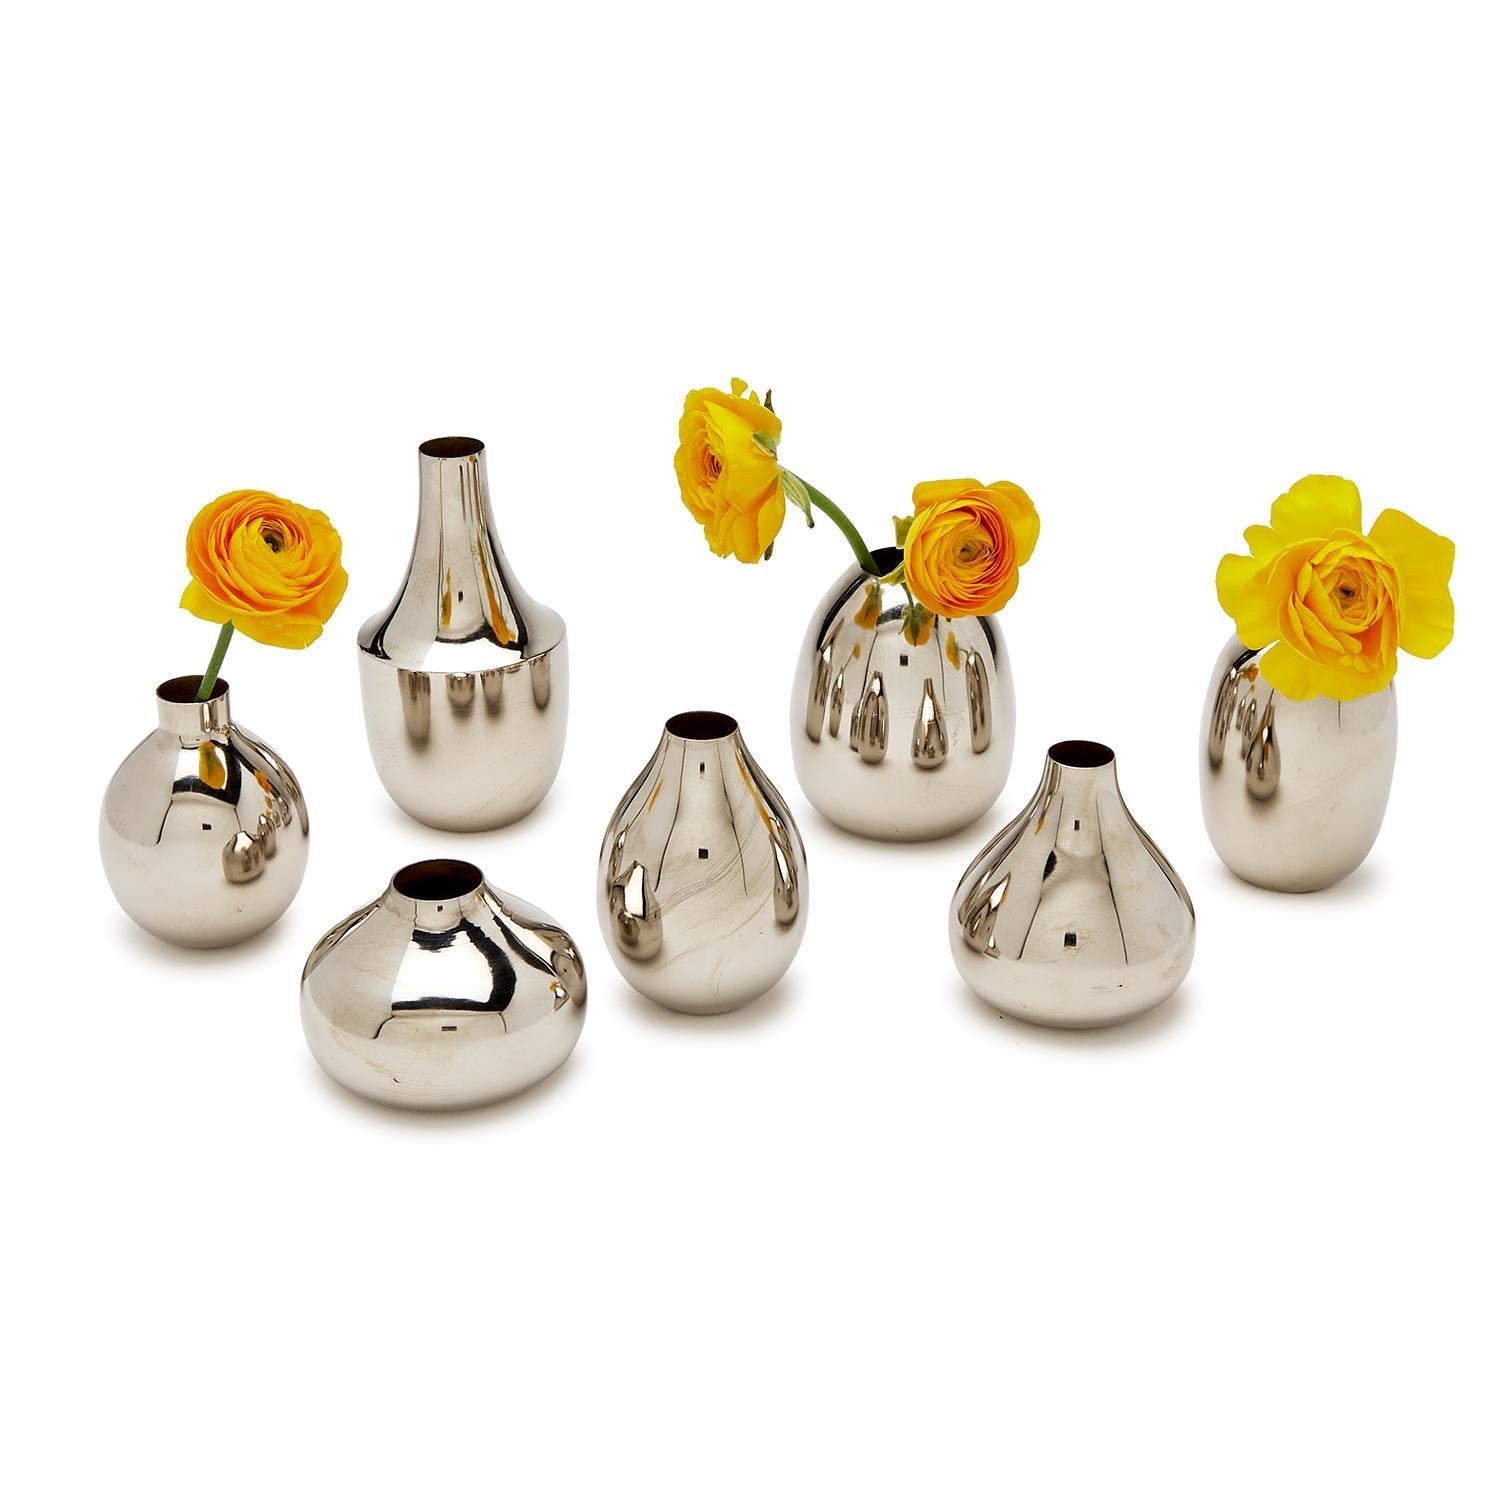 S7 Silver-Plated Nickel Vases